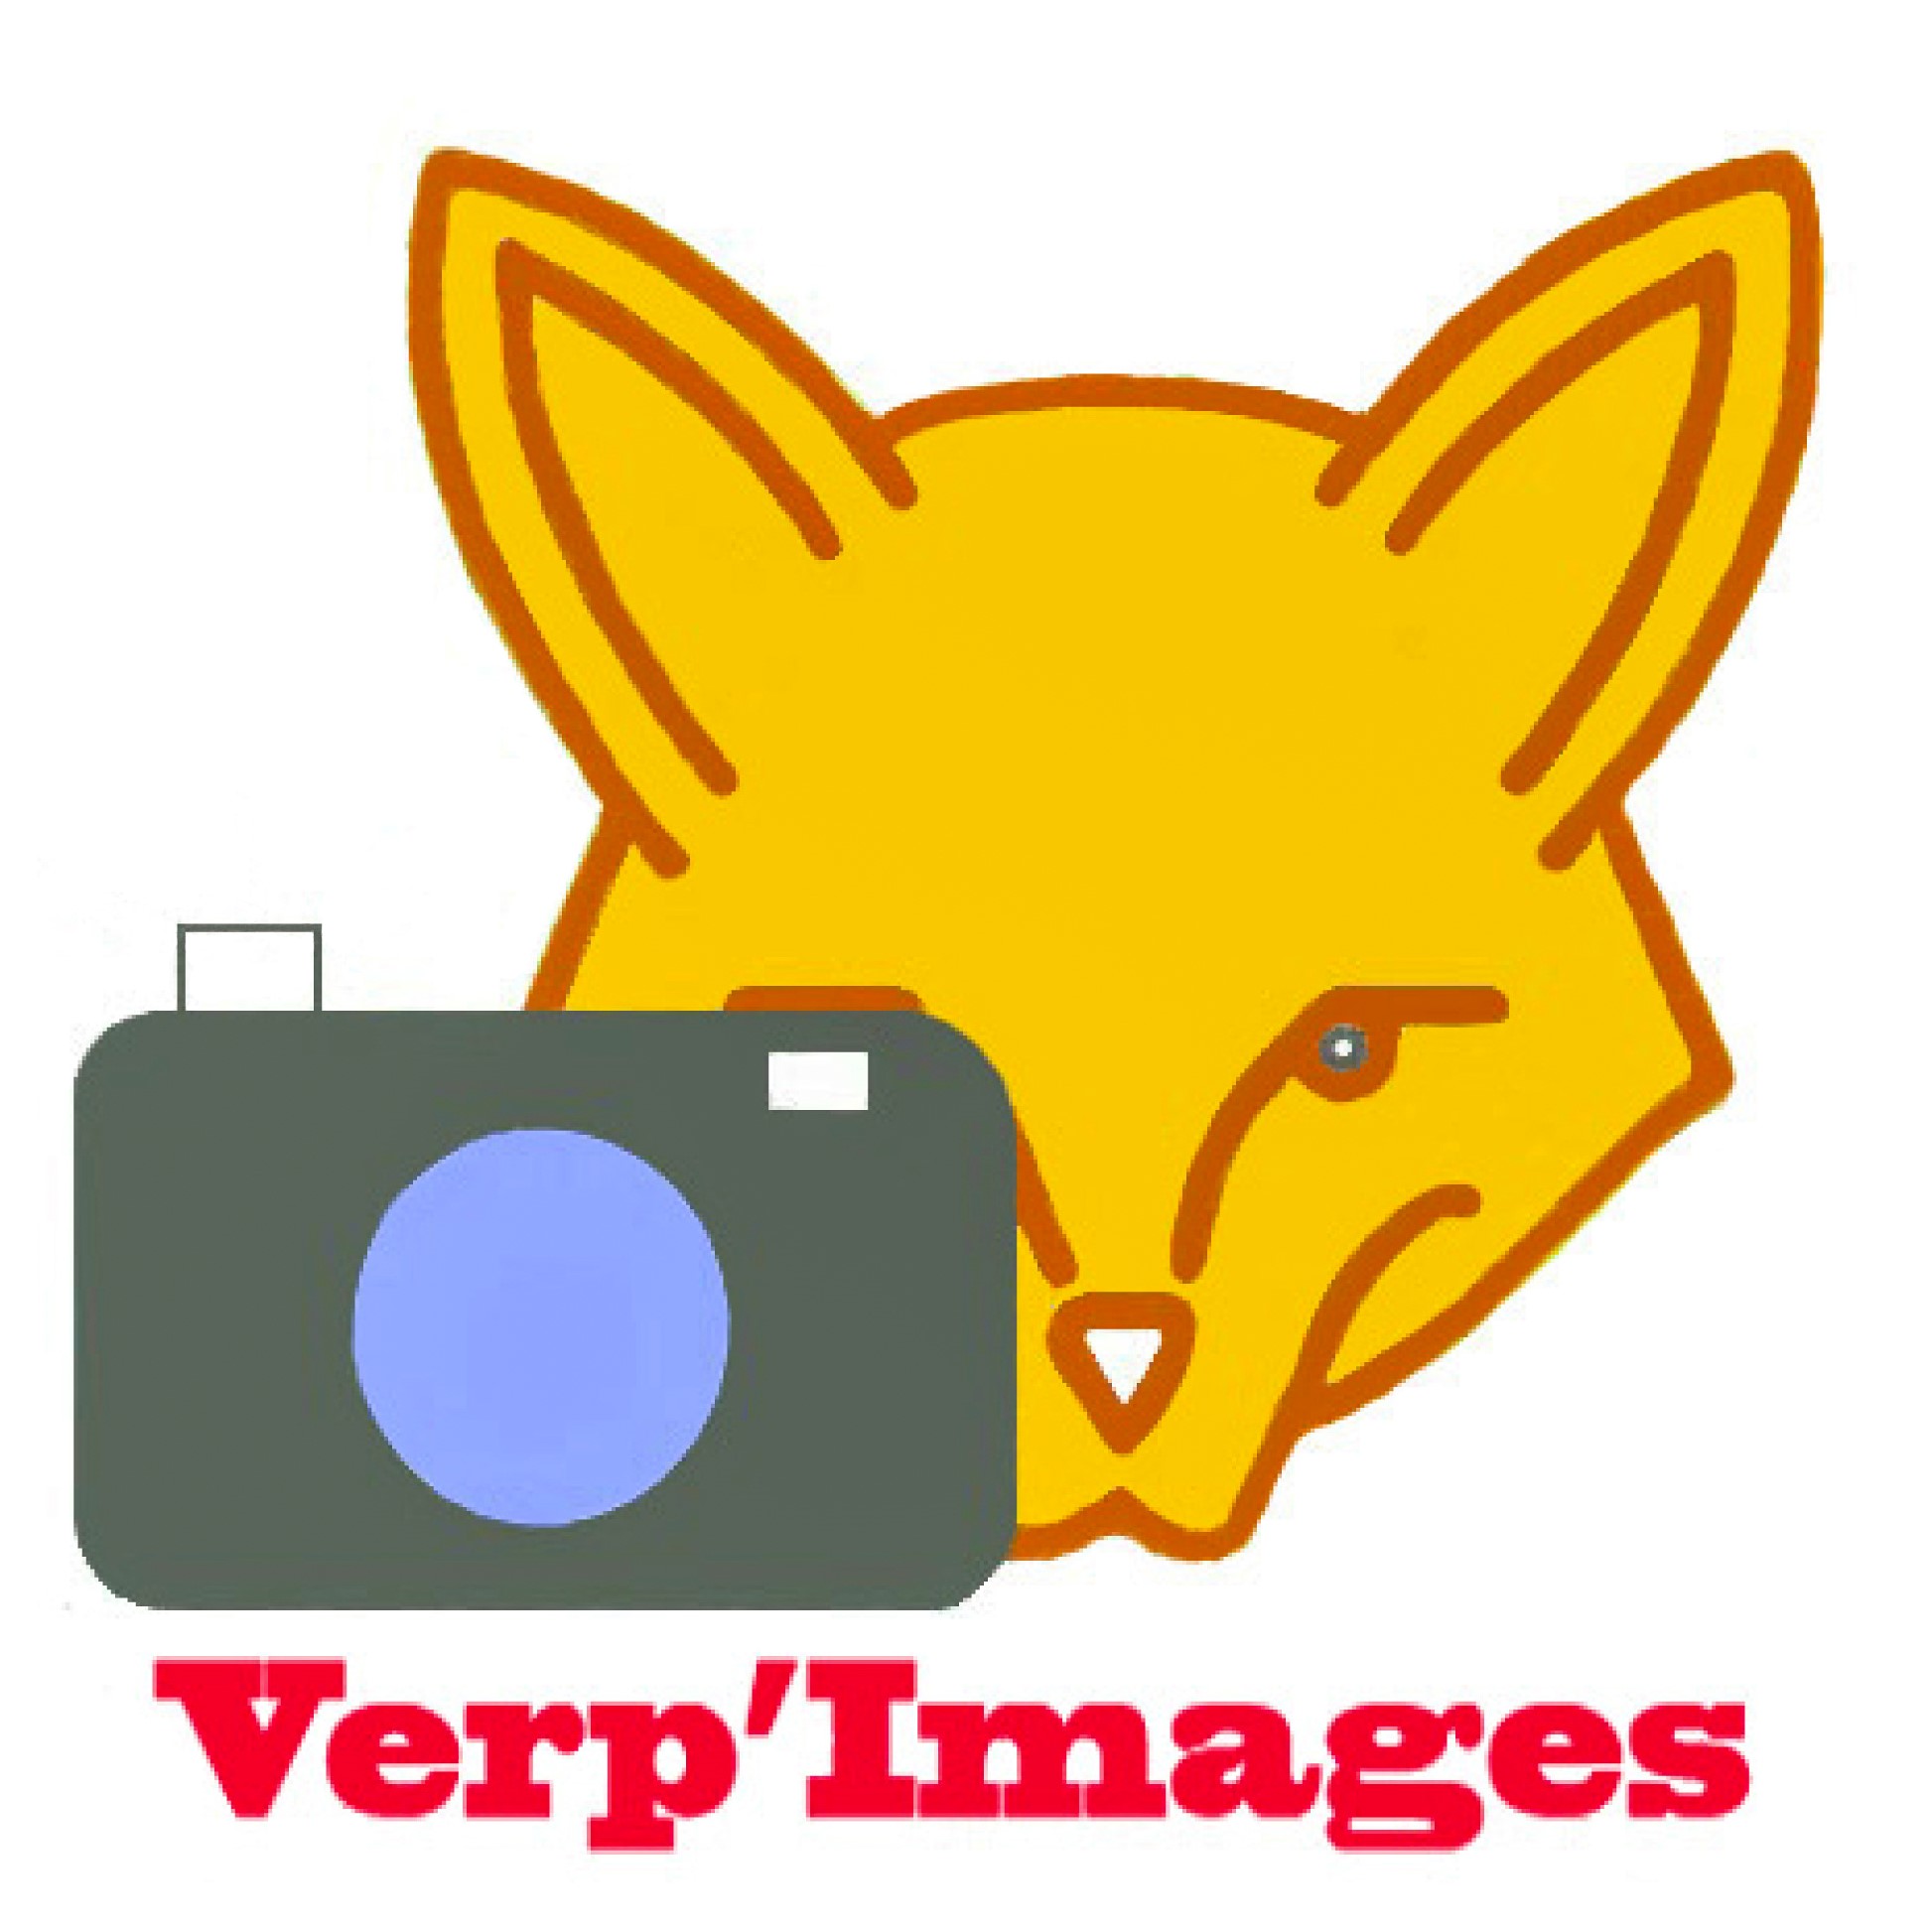 Verp' Images